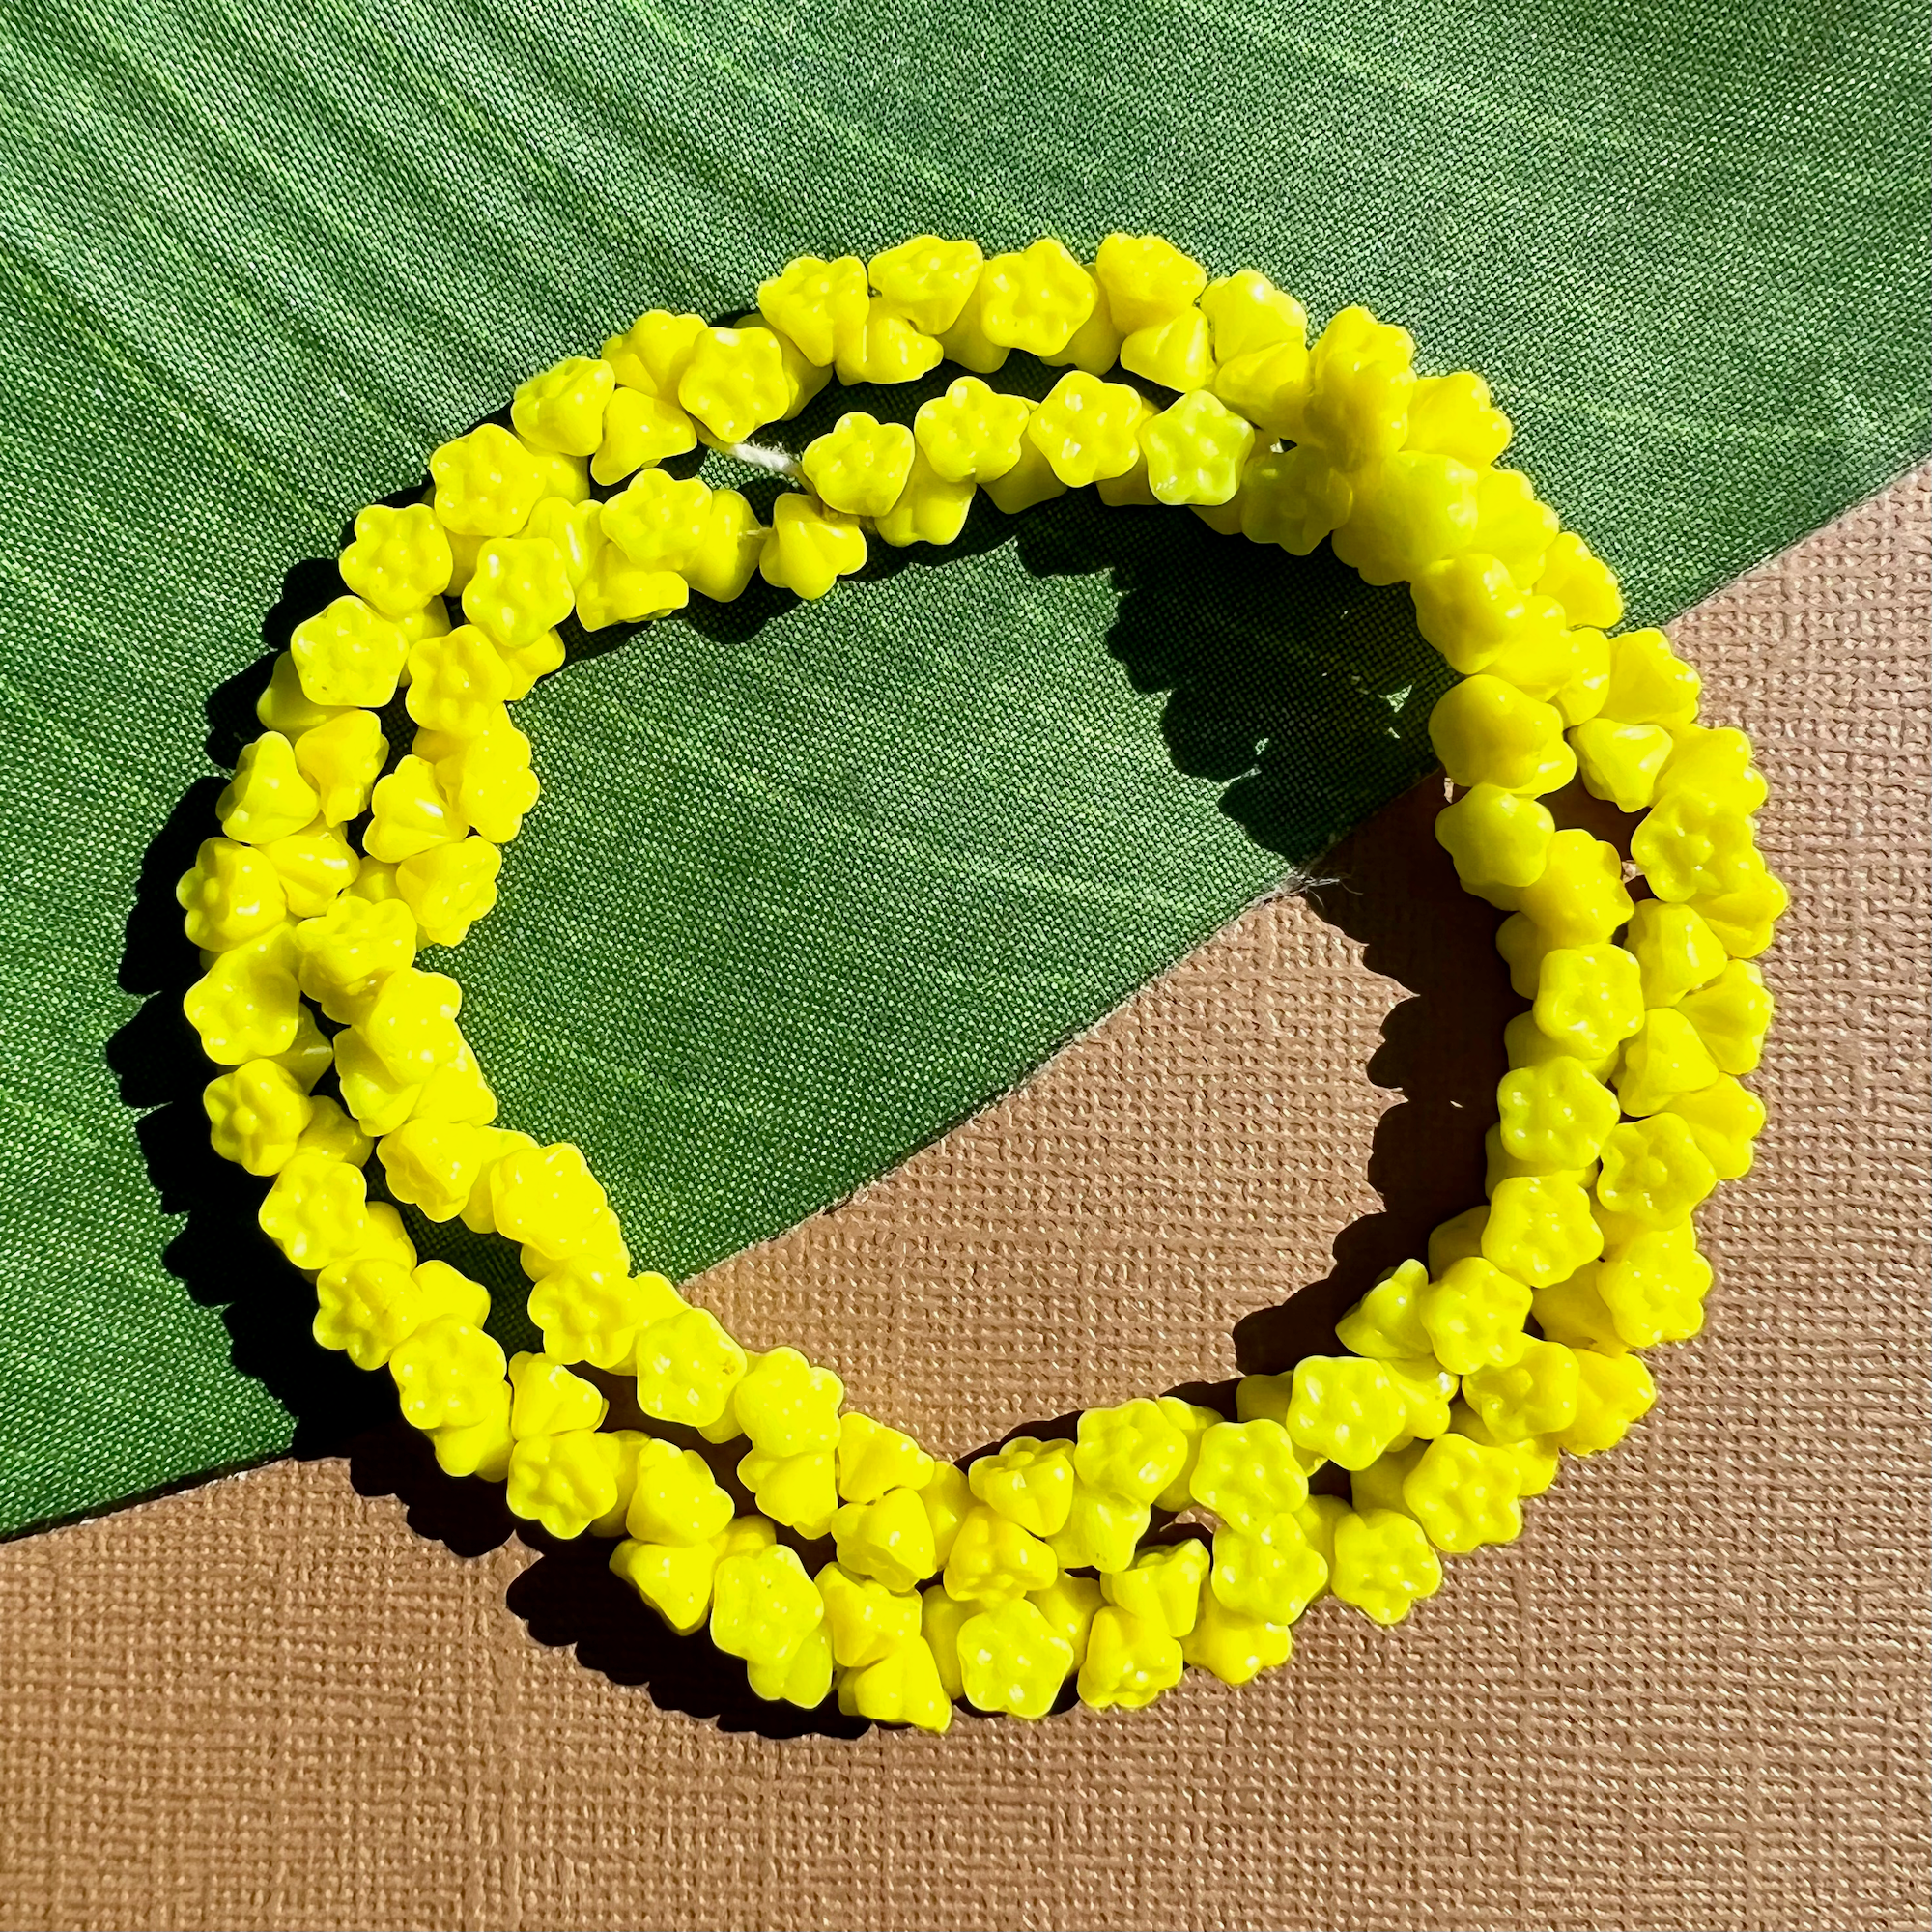 Yellow Flower Drop Beads - 150 Pieces